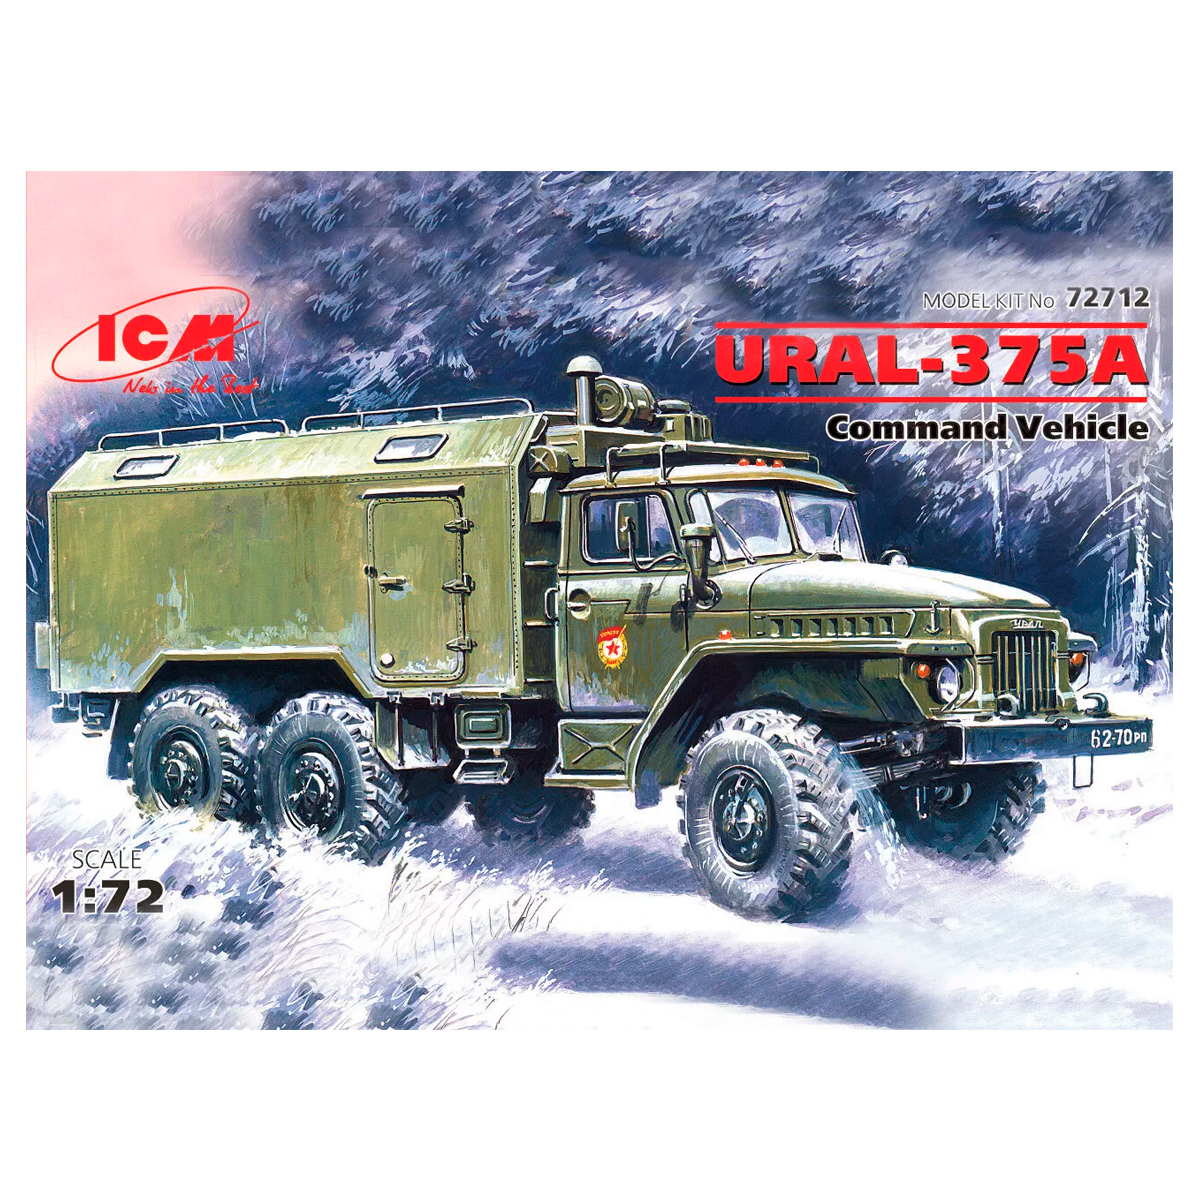 URAL-375A, Command Vehicle 1/72